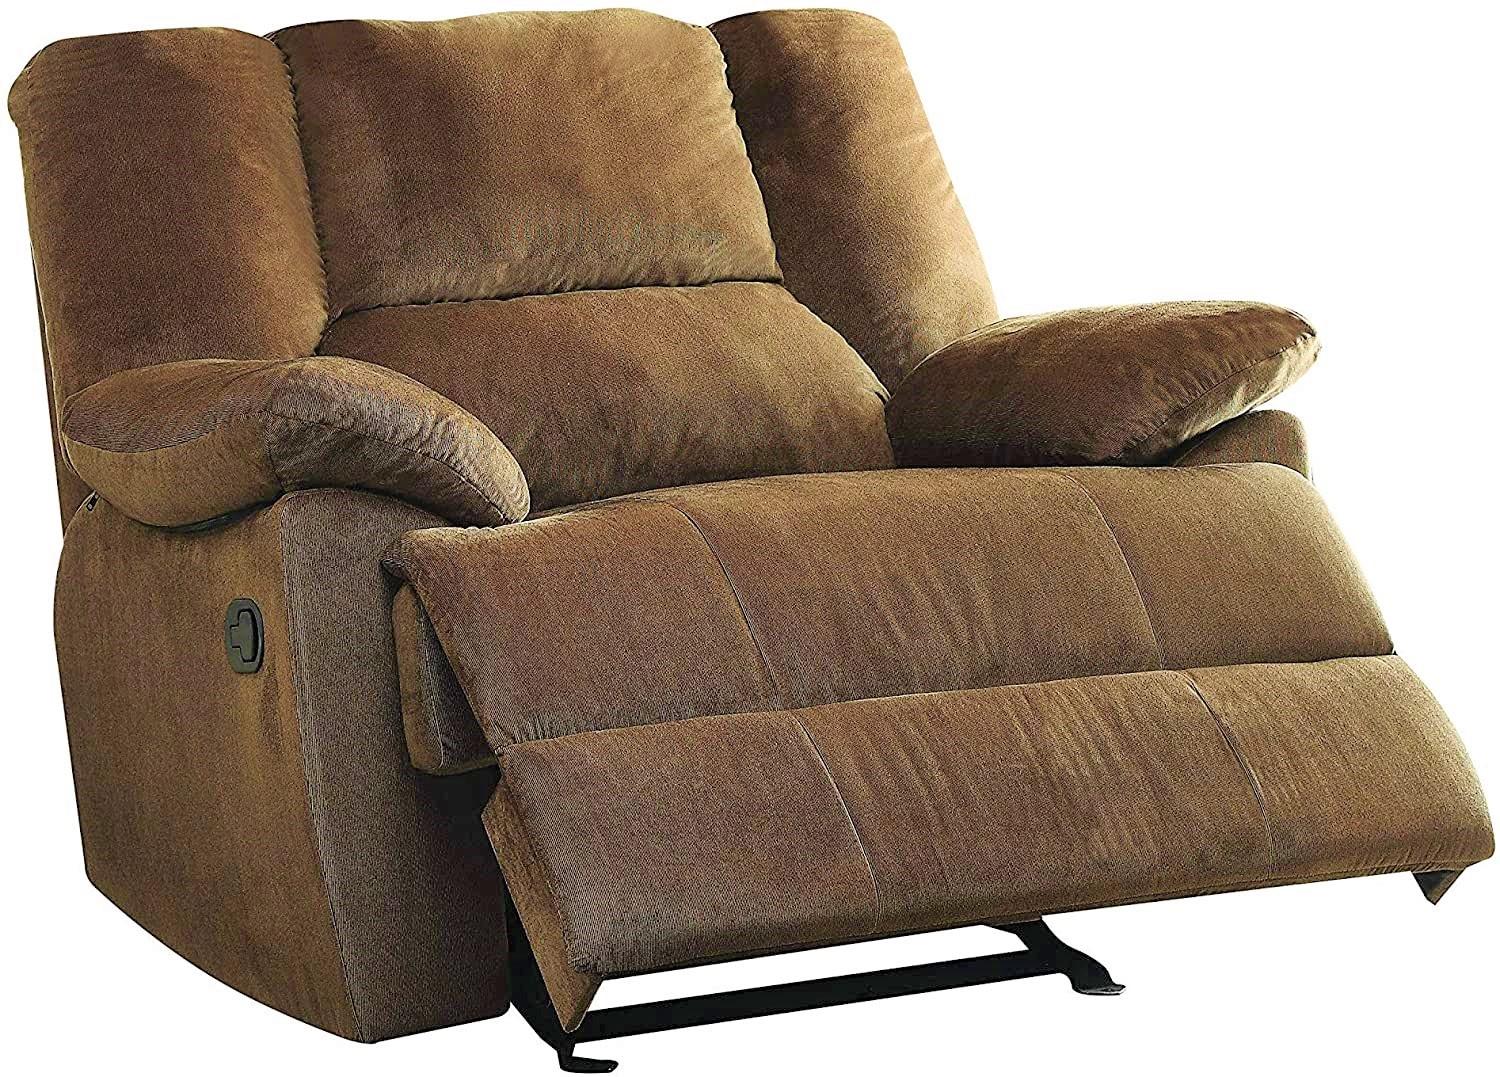 

    
Contemporary Chocolate Corduroy Glider Recliner by Acme Oliver 59415
